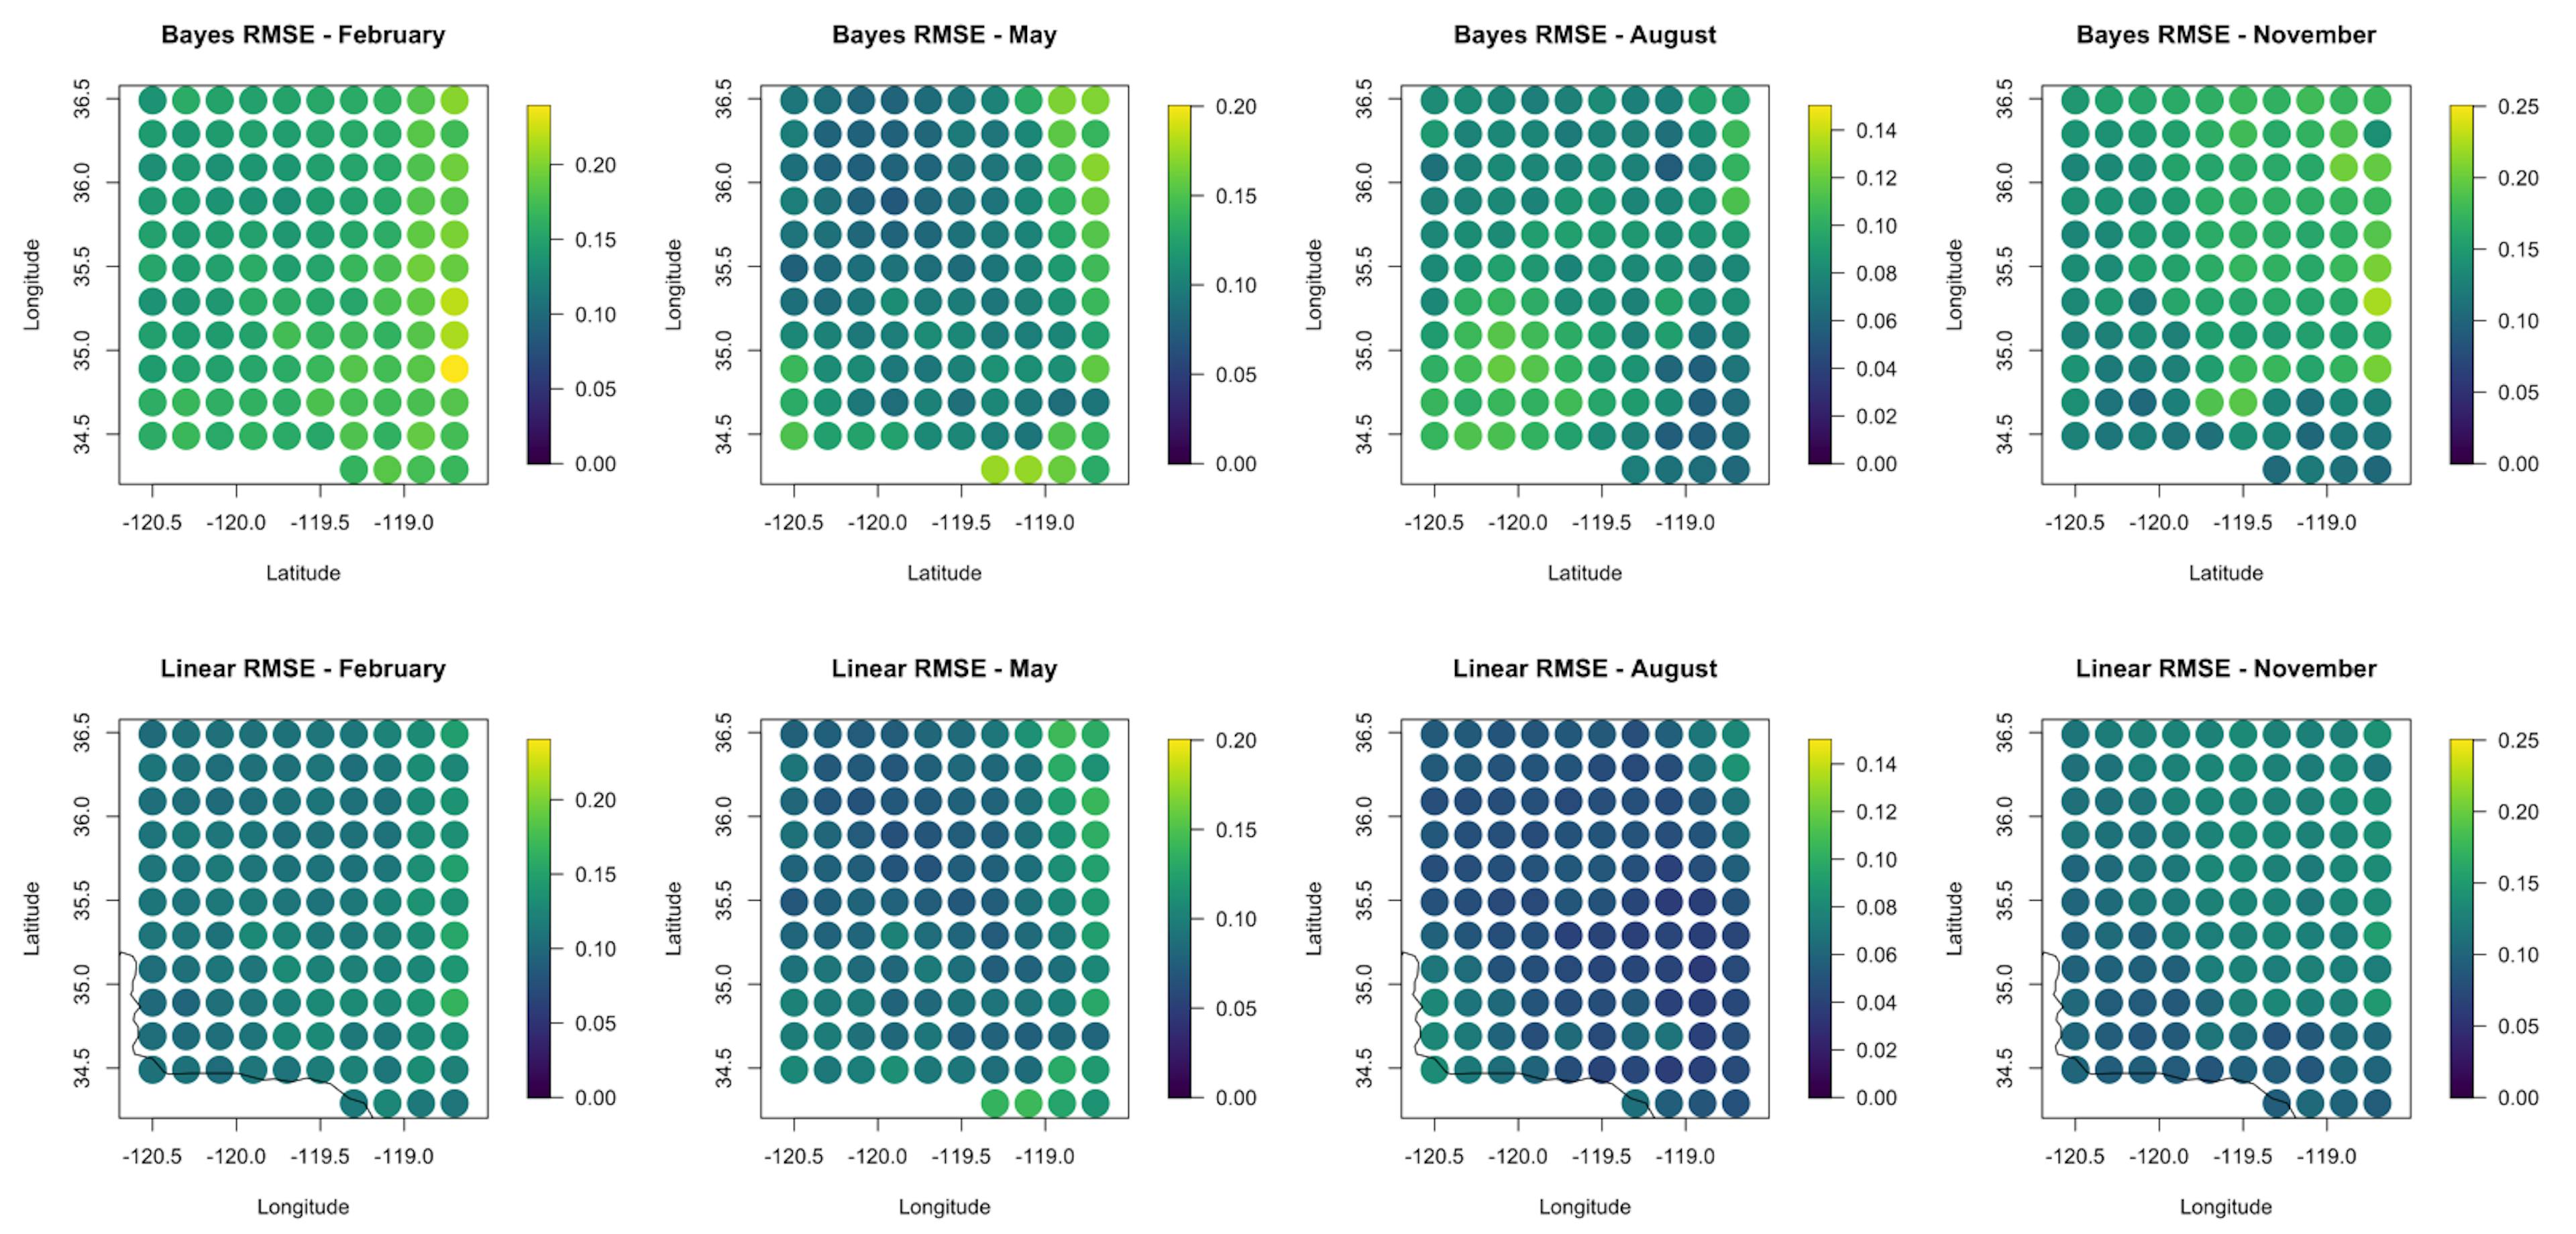 Figure 5. A comparison of the RMSE values for out of sample prediction for the four months considered. Bayesian model results are on the top row and naive regridding results the bottom row. The RMSE is generally higher for the Bayesian results and in November for both models.